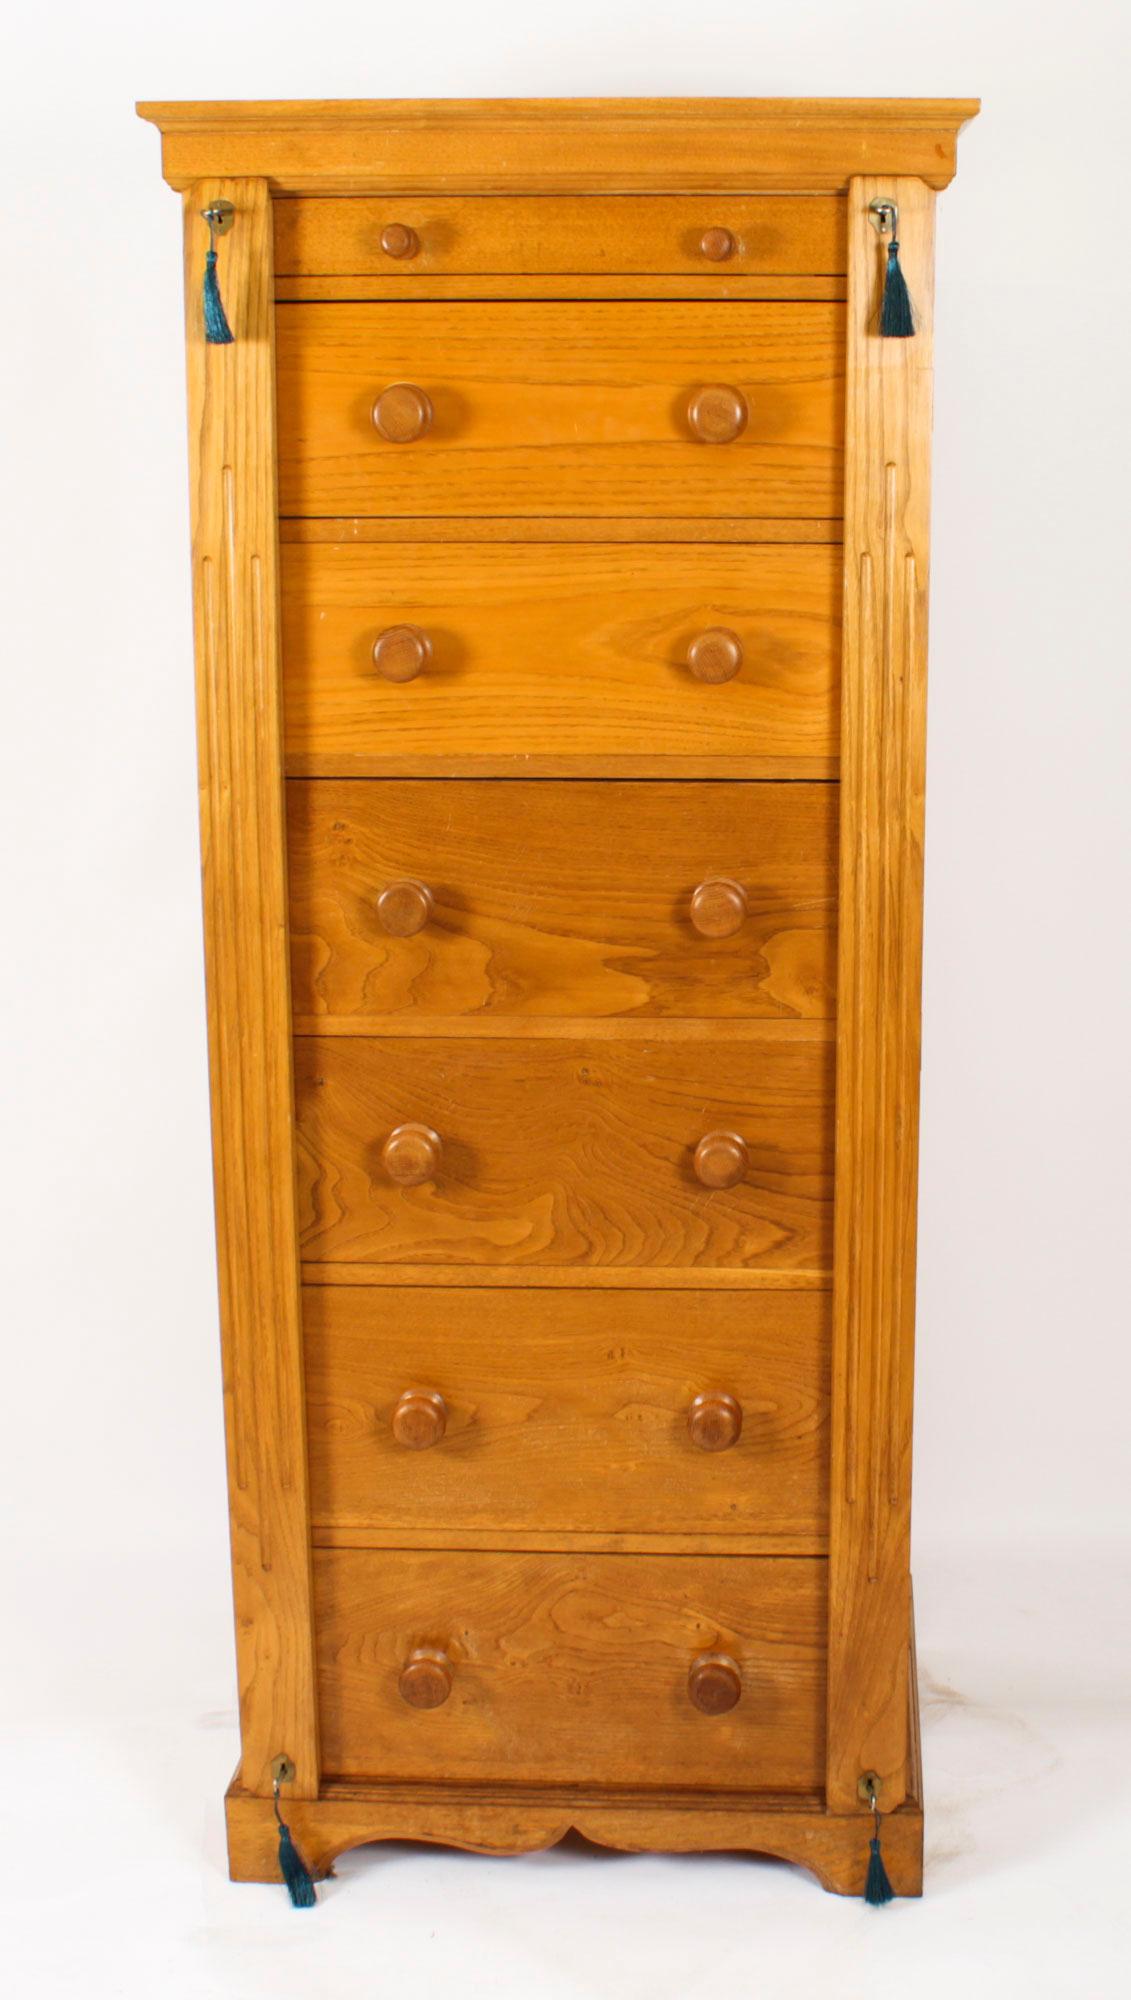 This is a fabulous vintage oak English Wellington chest, late 20th century date.

The piece is made from beautiful oak which has a stunning grain and colour, and features a  collectors drawer at the top with six full size drawers below.

It is a